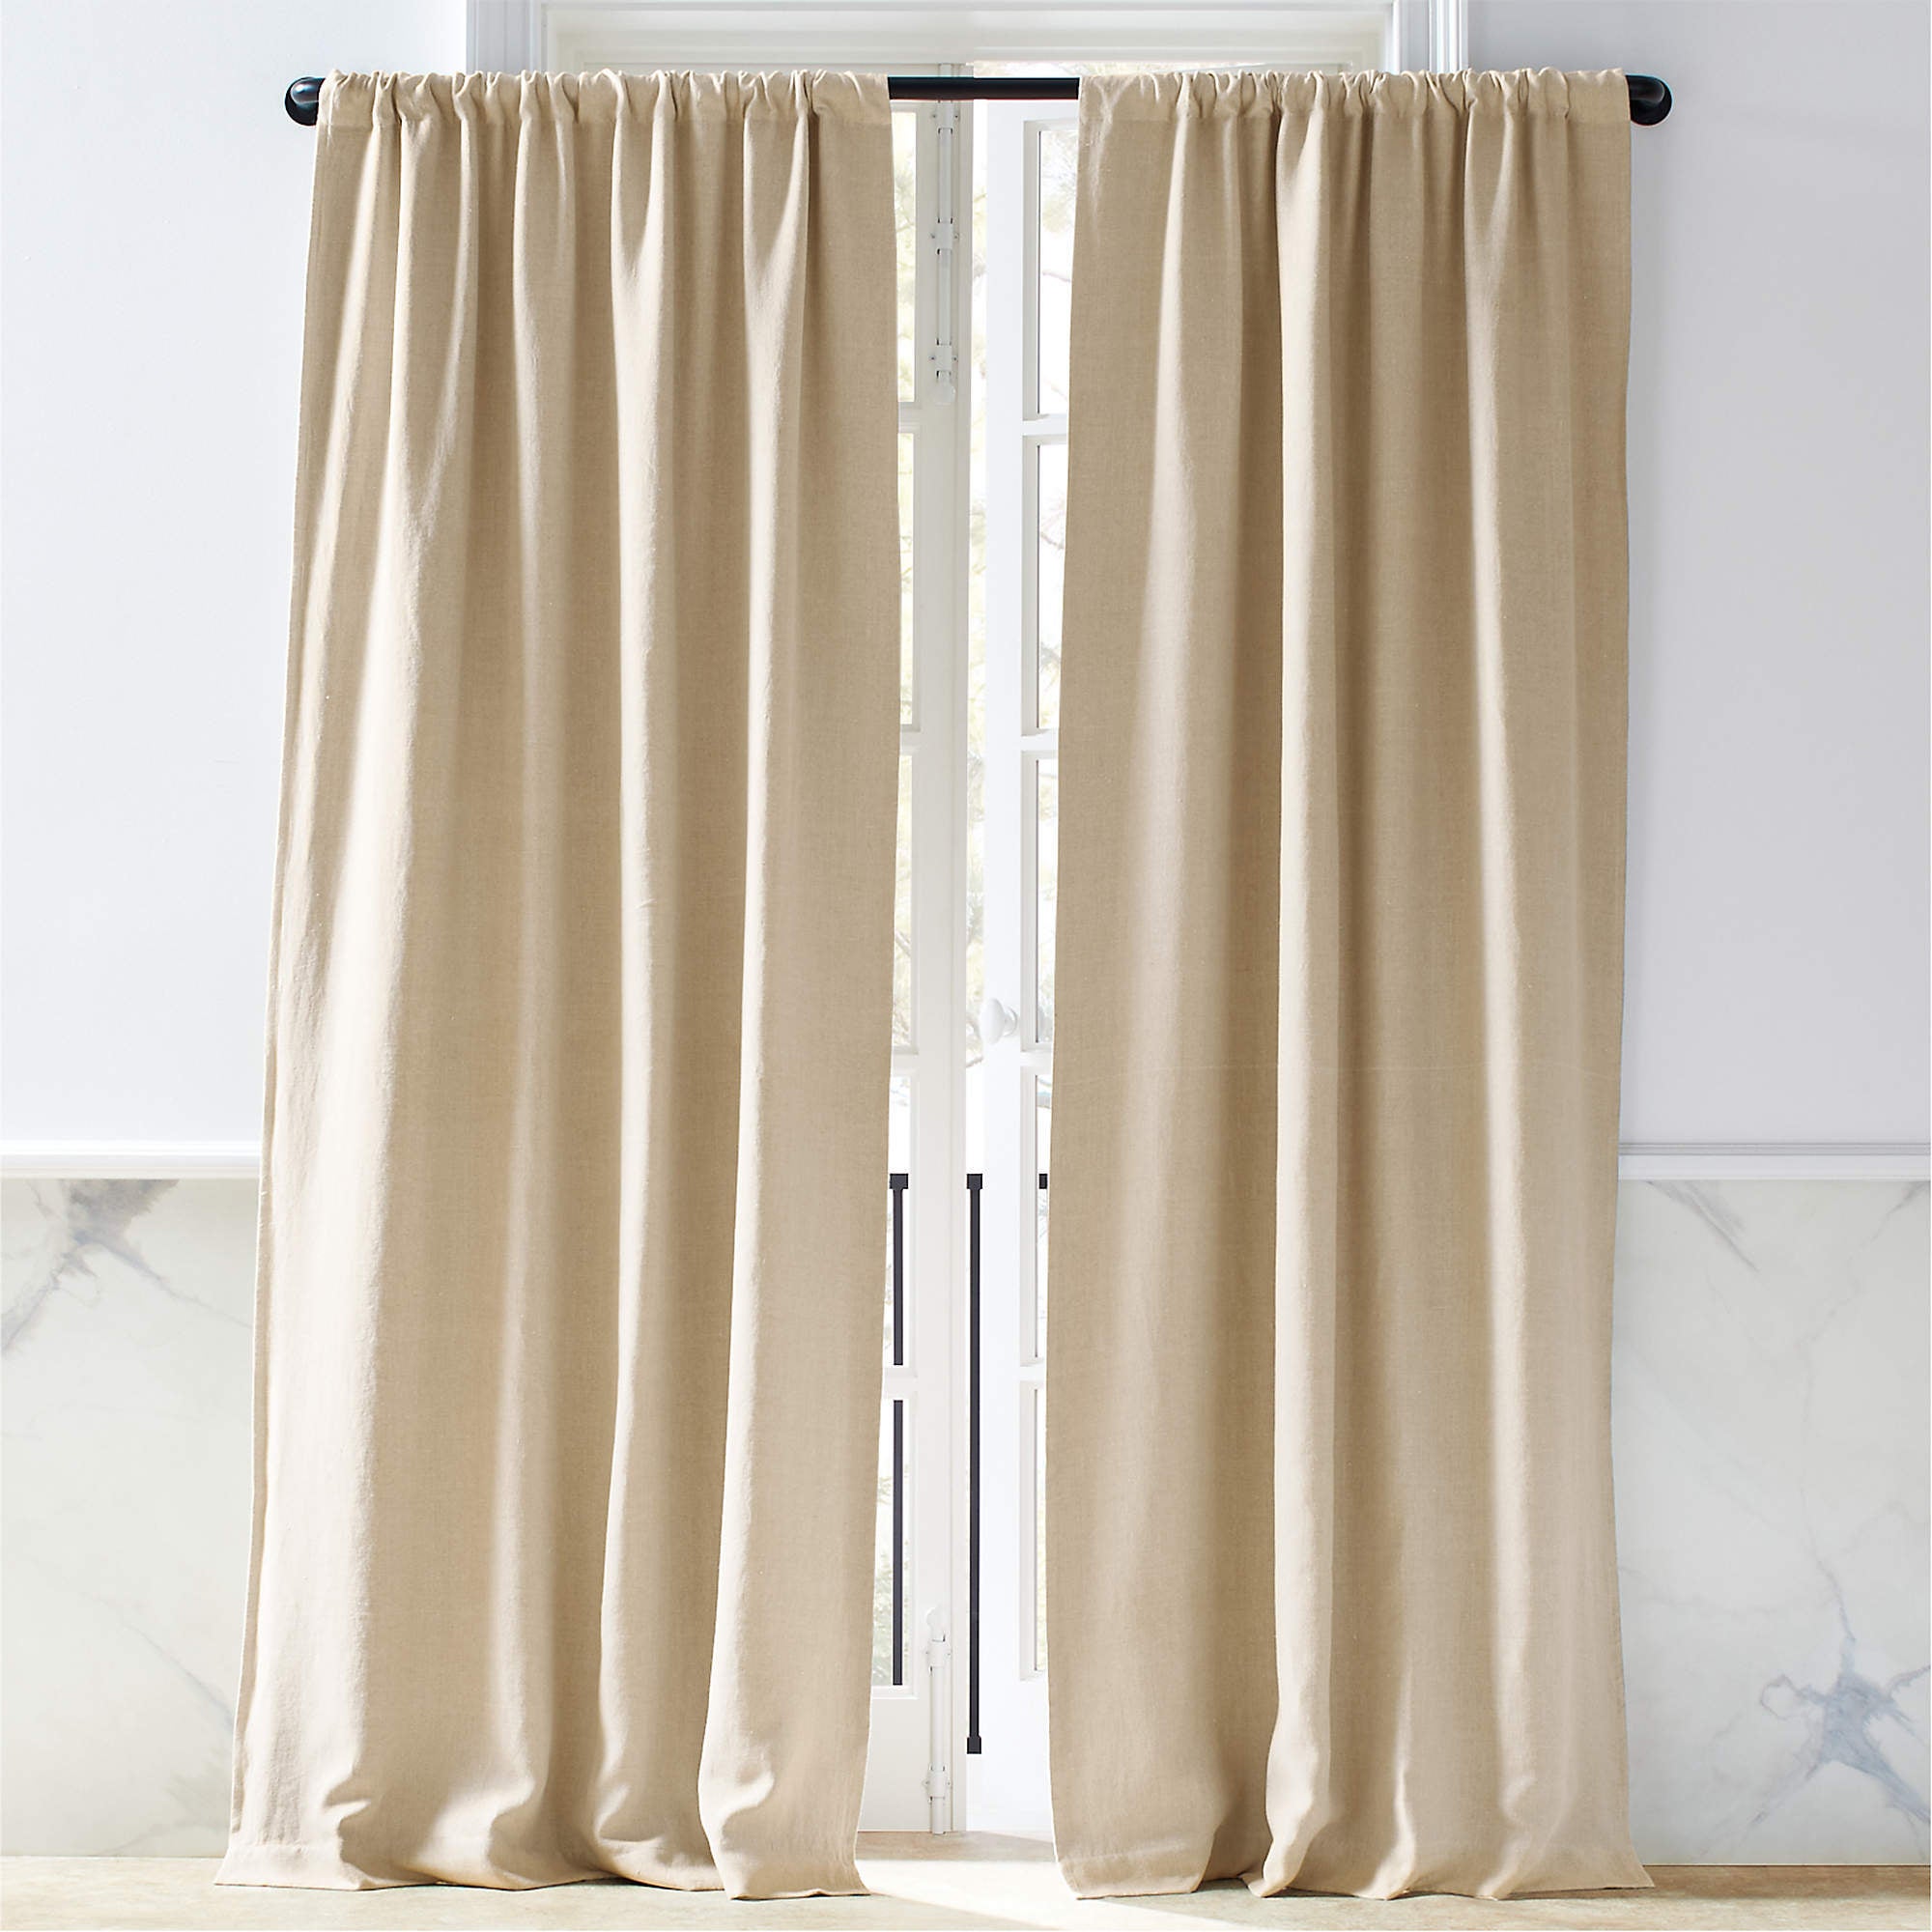 Natural Linen Blackout Curtains from CB2